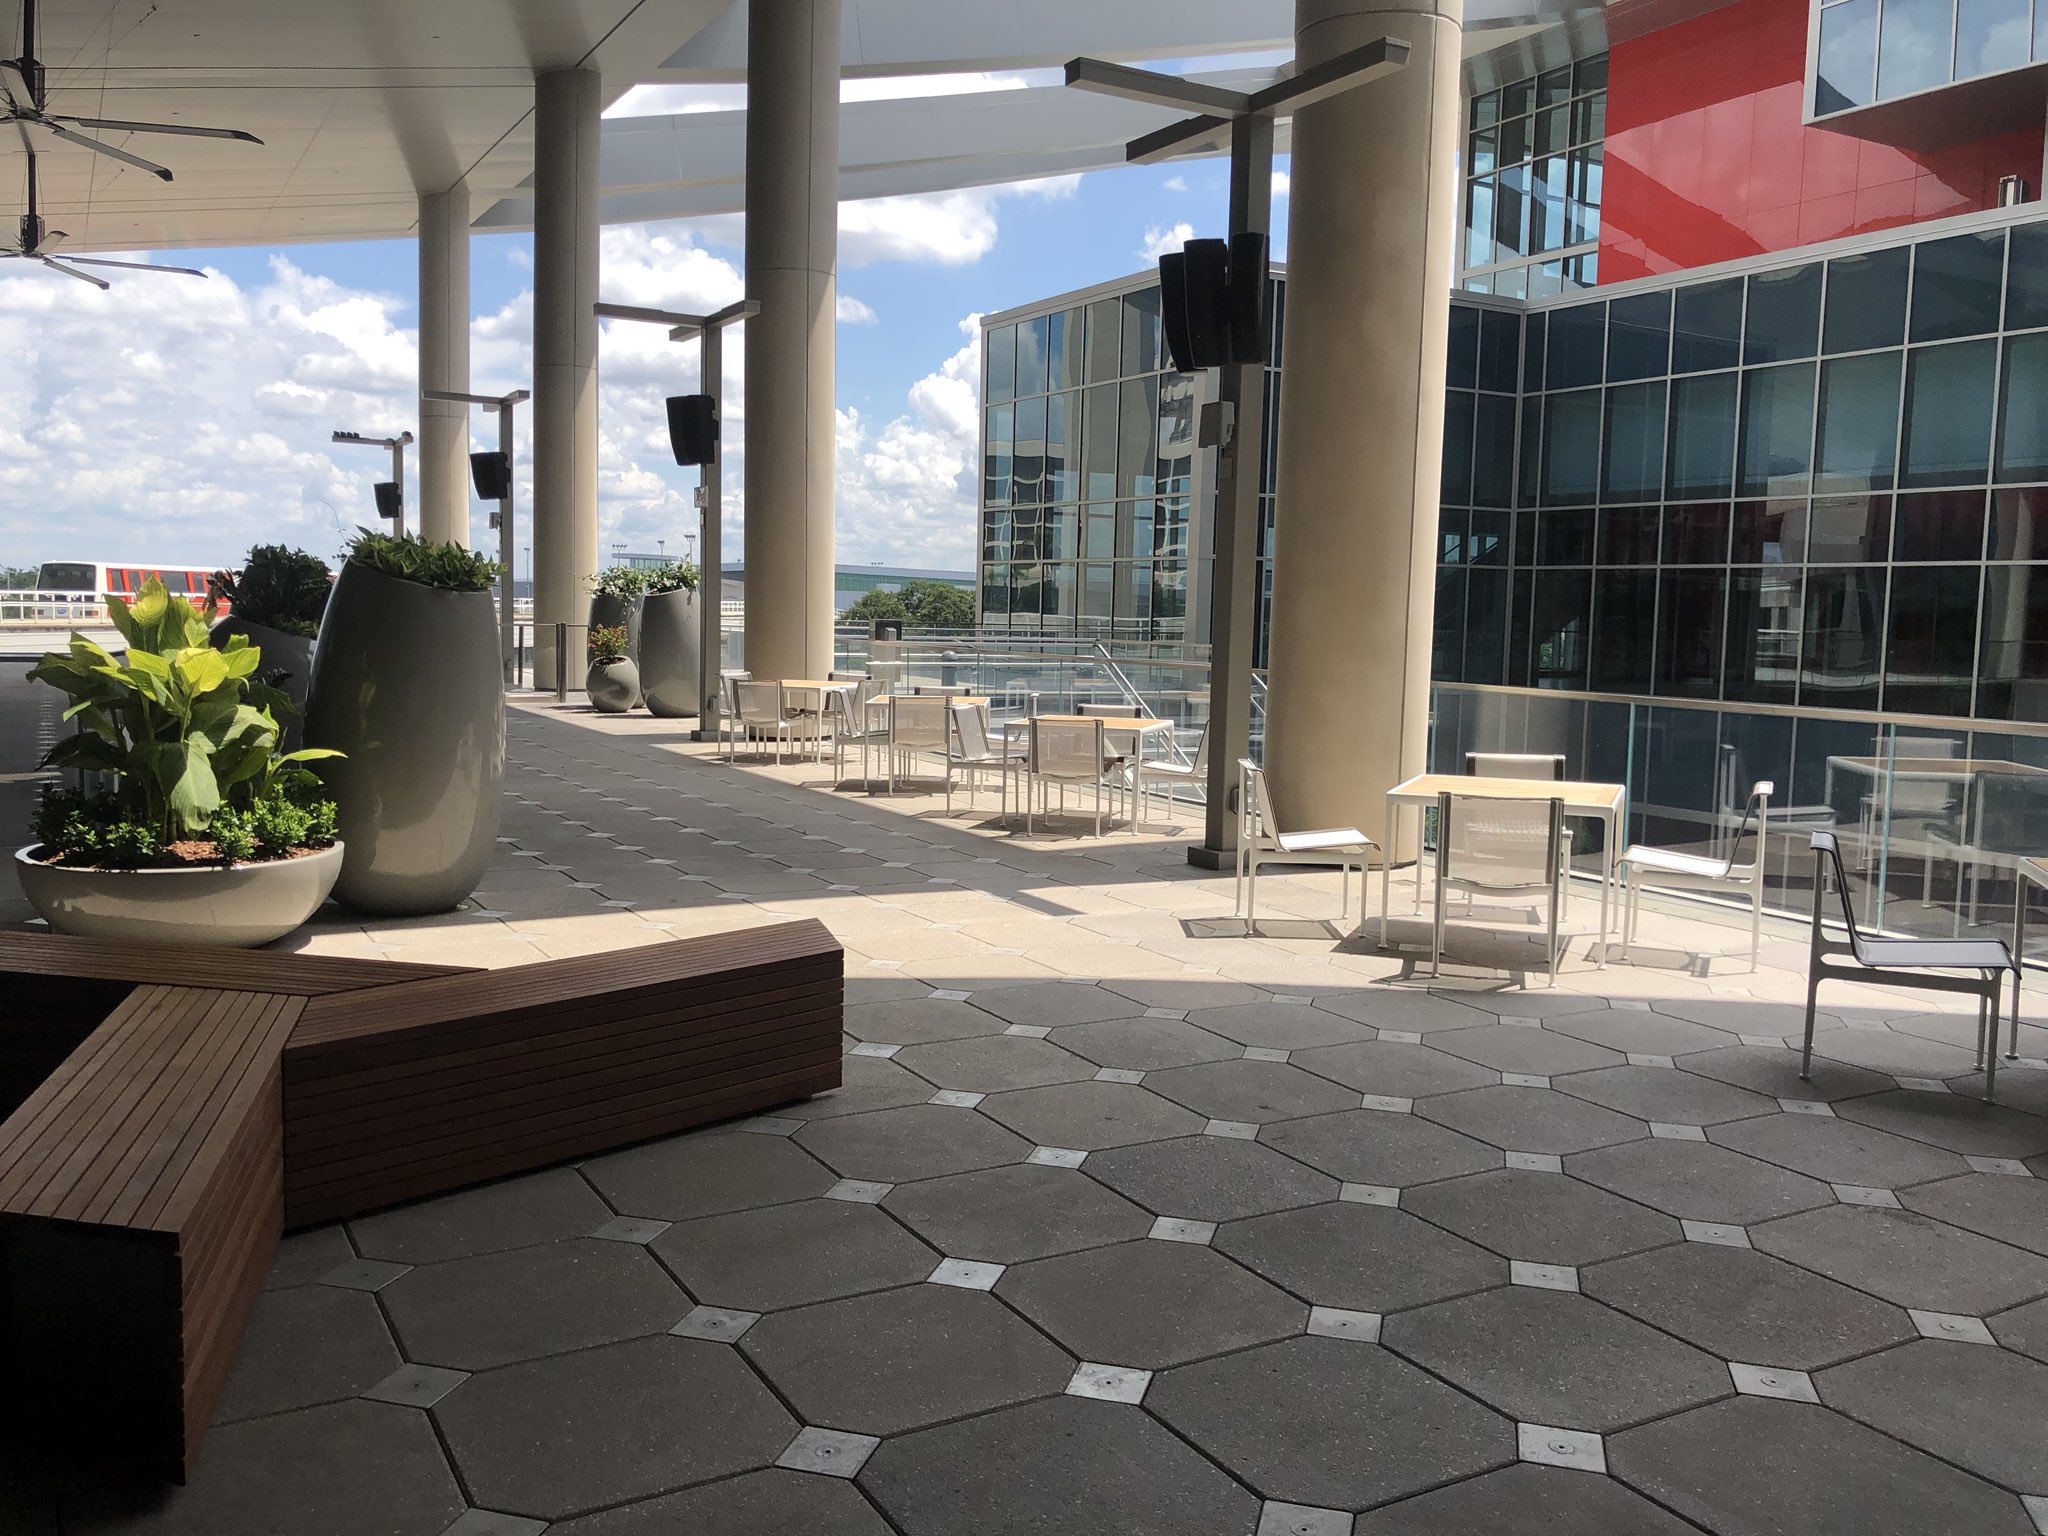 Tampa Intl Airport ️ on Twitter: "Our newest outdoor terrace is open to